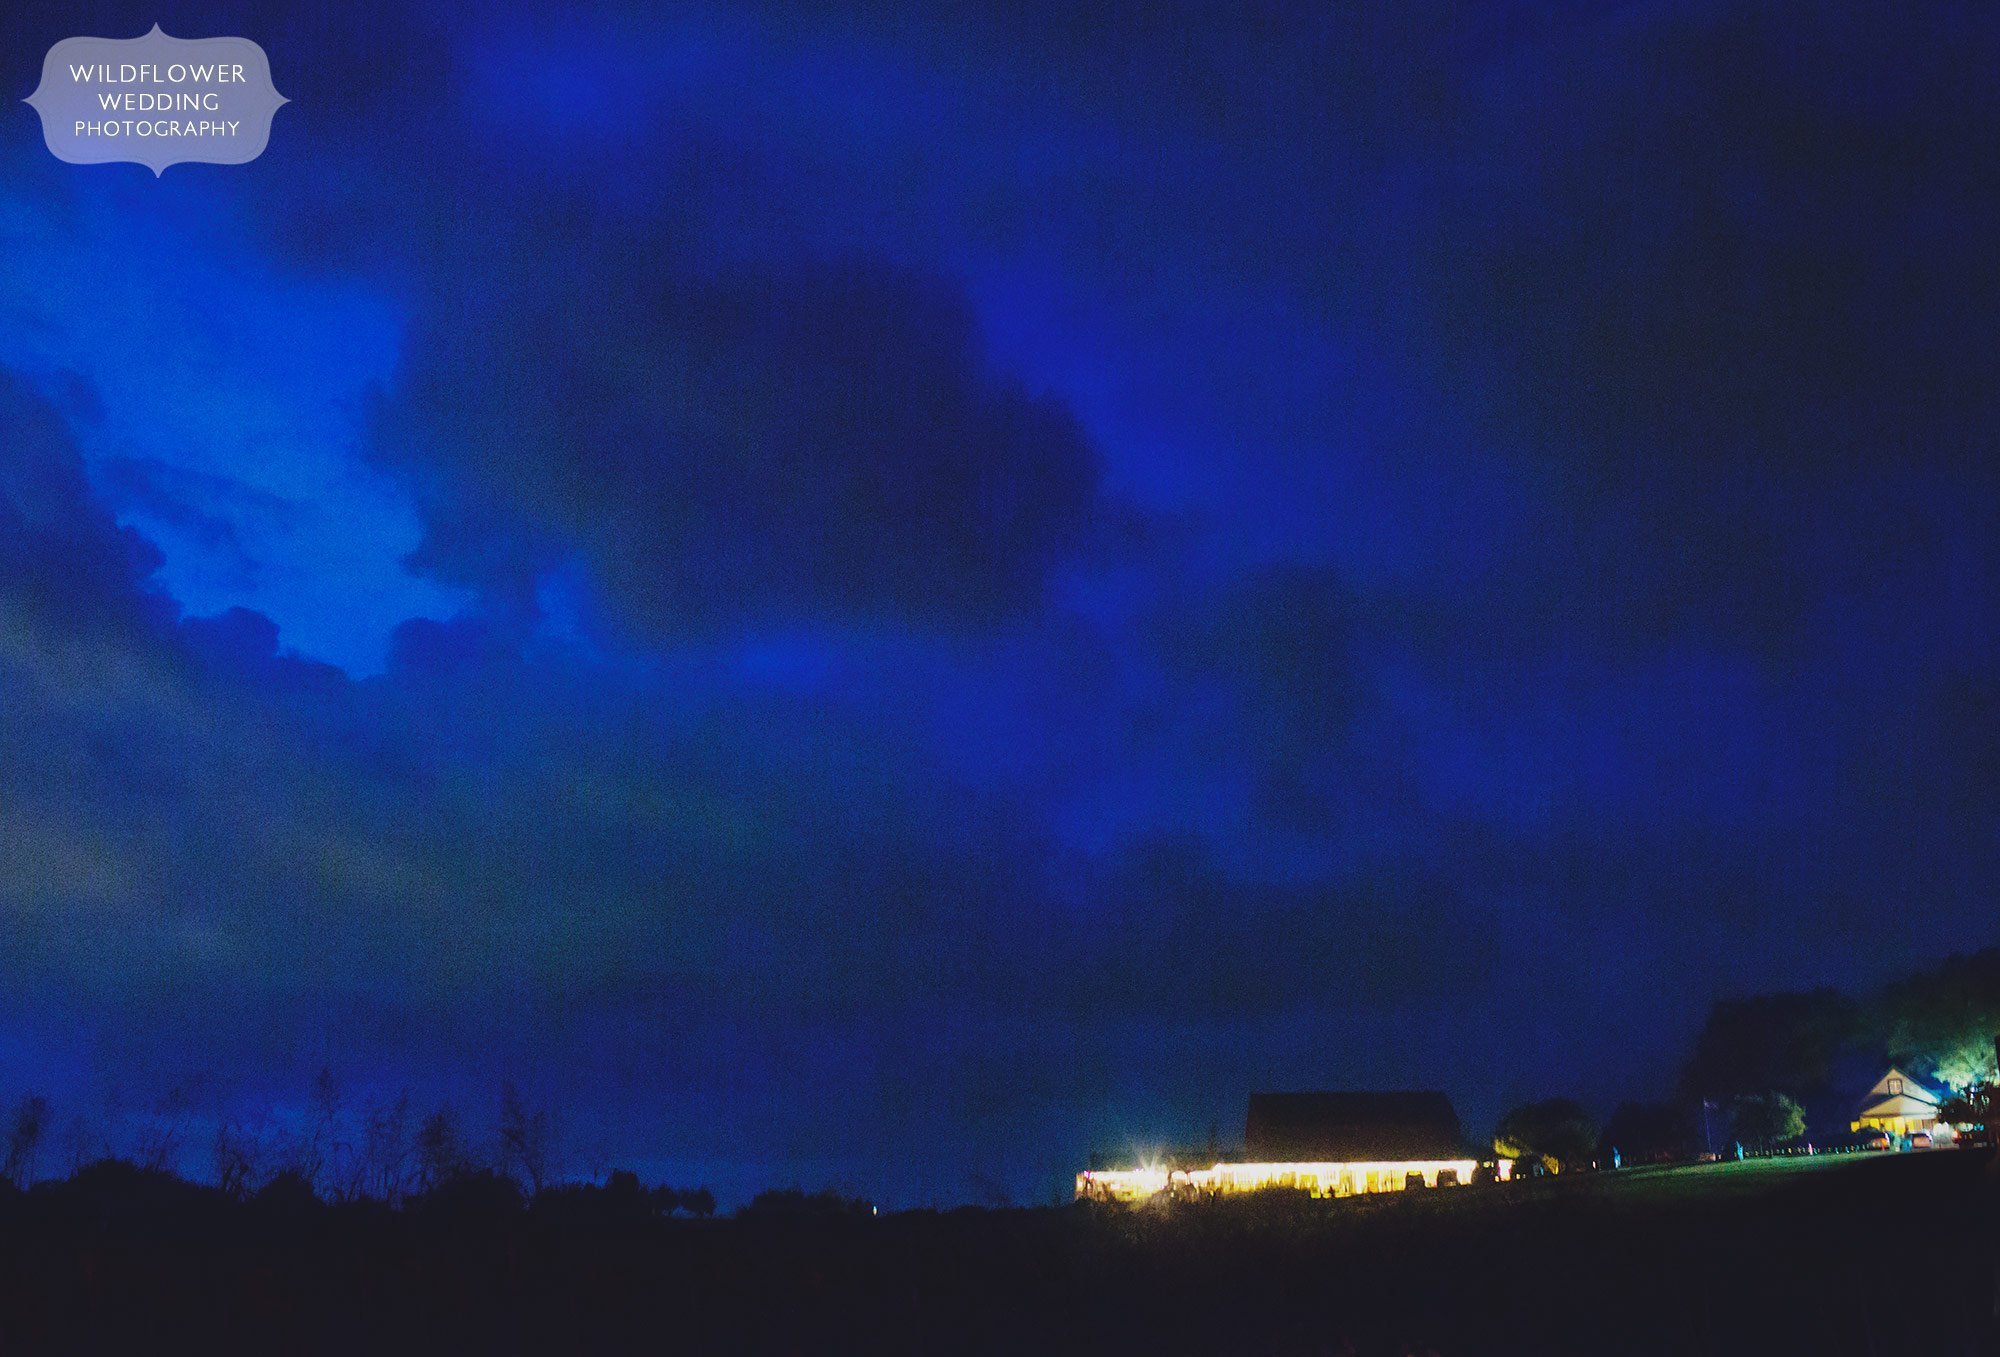 Storm clouds at dusk over the Weston Red Barn Farm wedding venue.